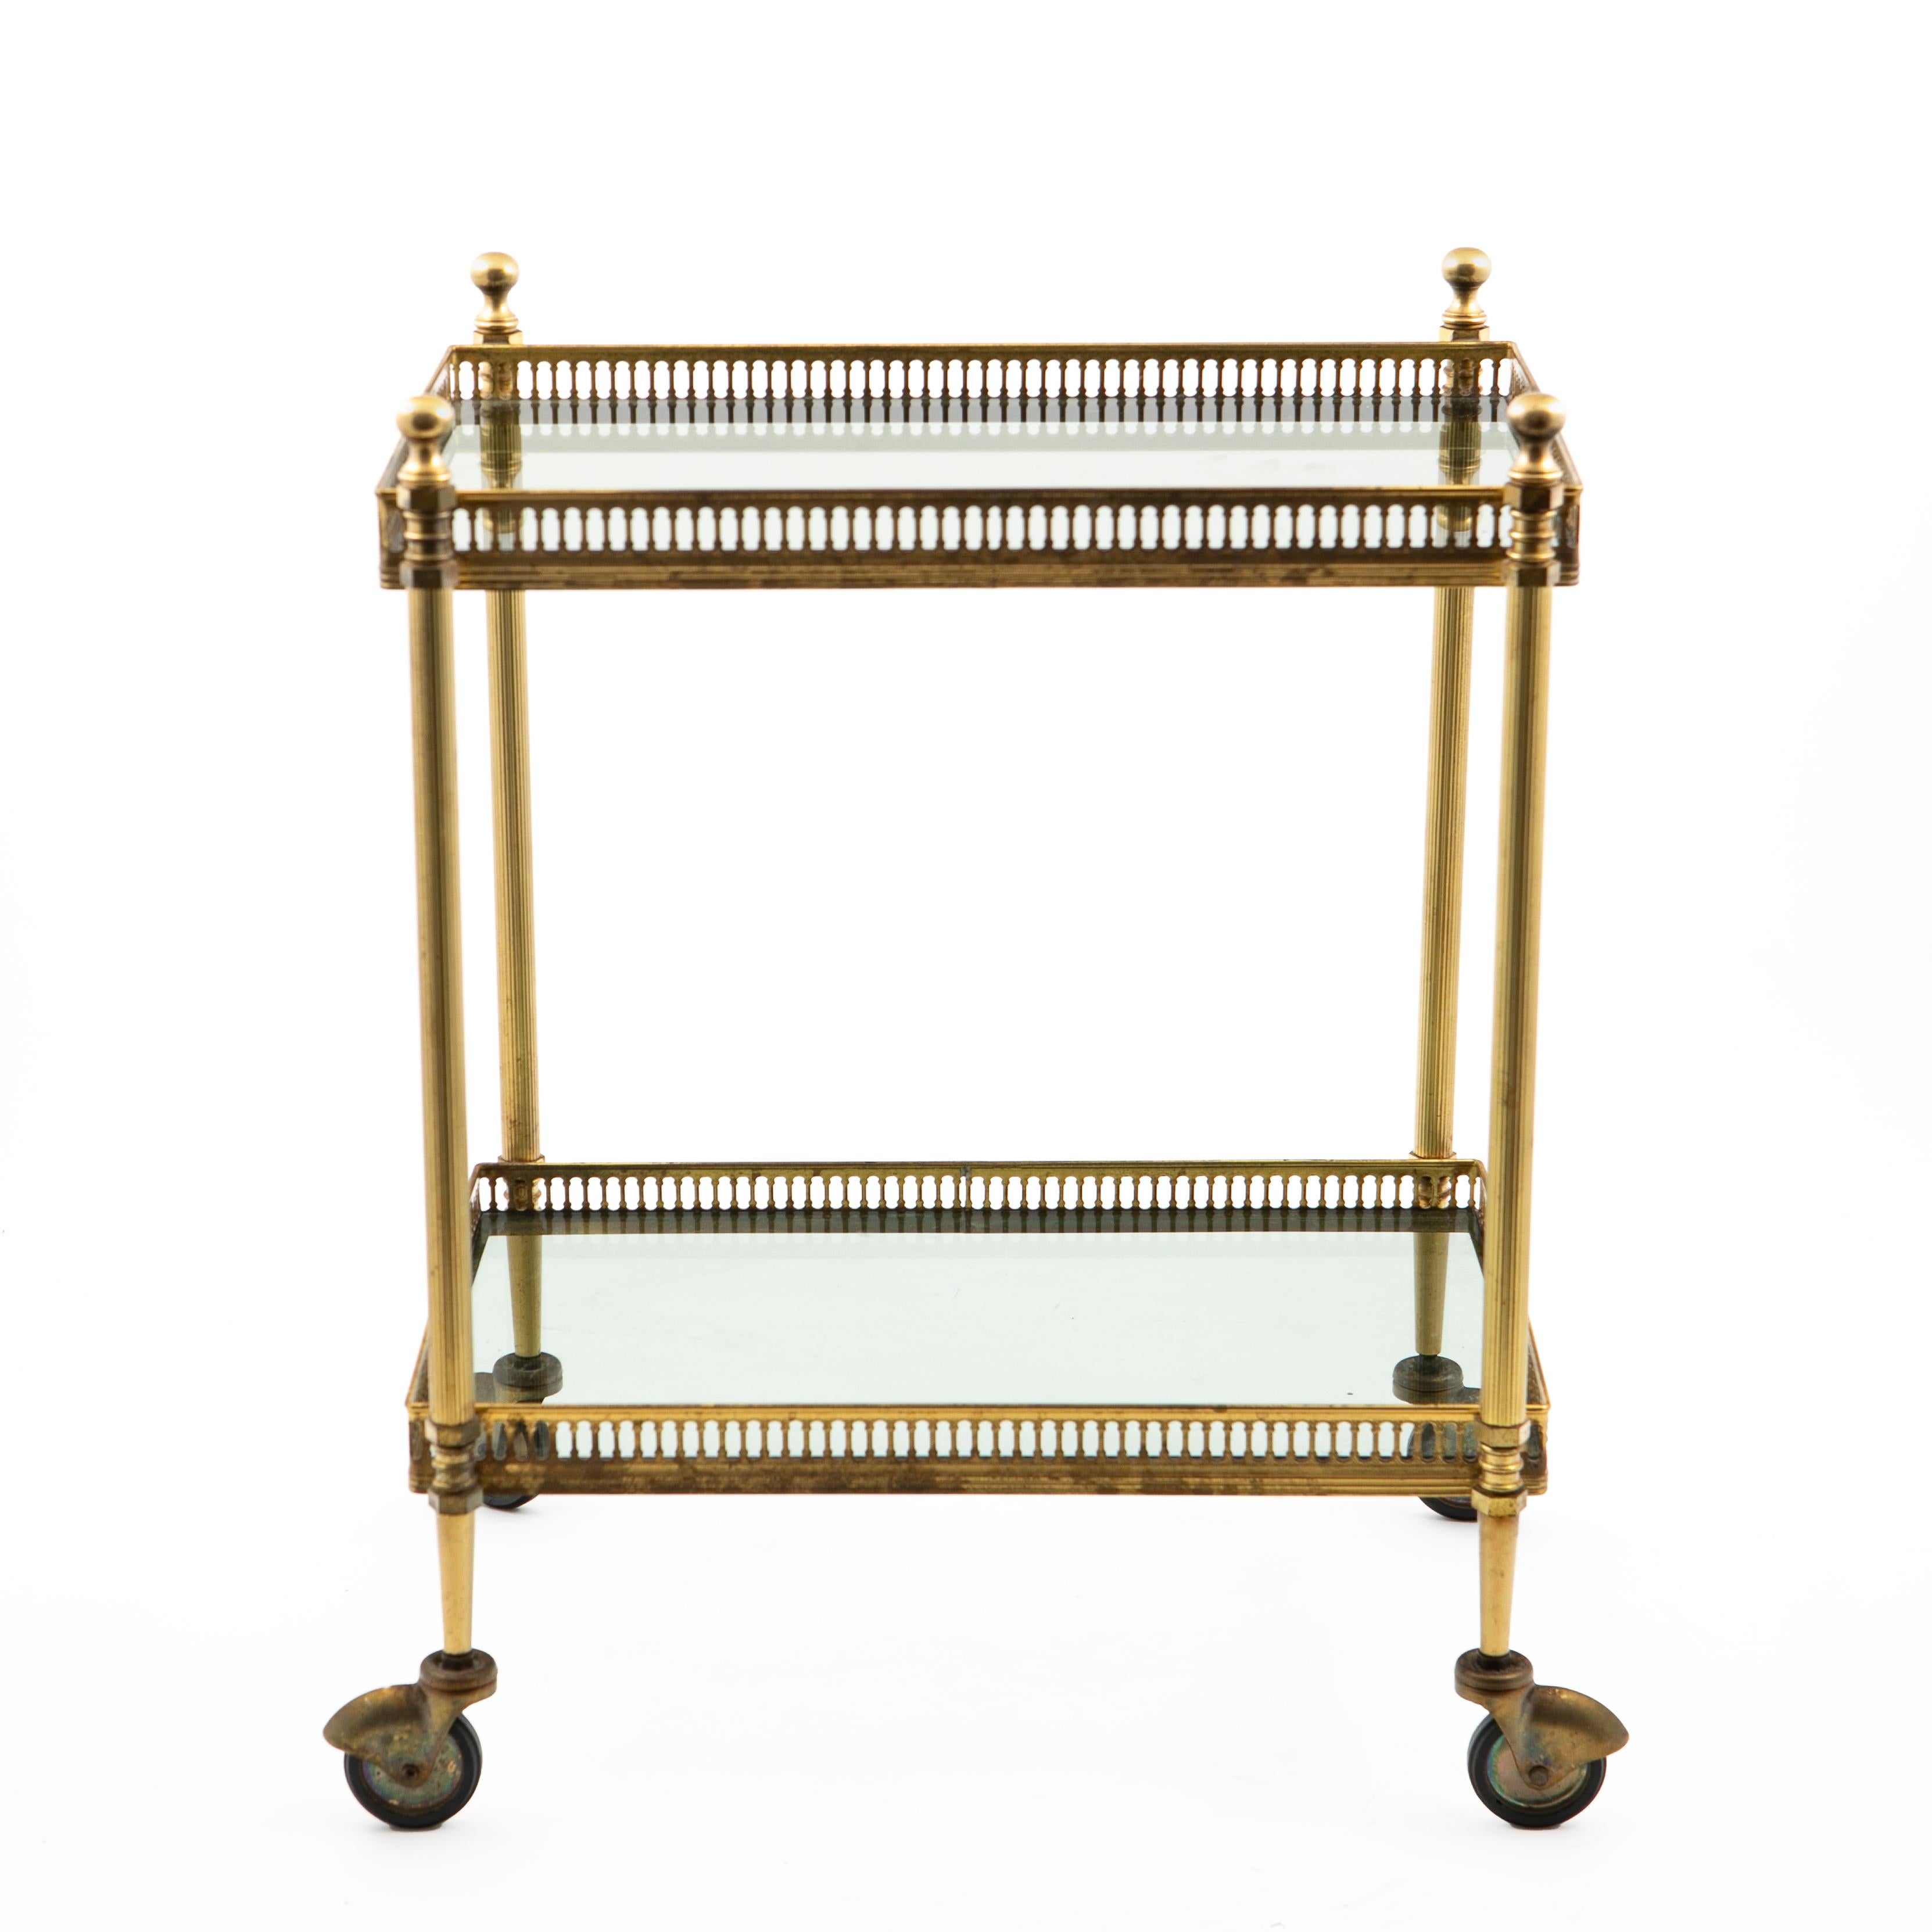 Small two-tiered brass serving trolly or bar cart featuring two smoked glass shelves surrounded by pierced brass galleries.
Round and fluted legs with decorative finials endning in castor wheels.
Original good vintage condition, nicely